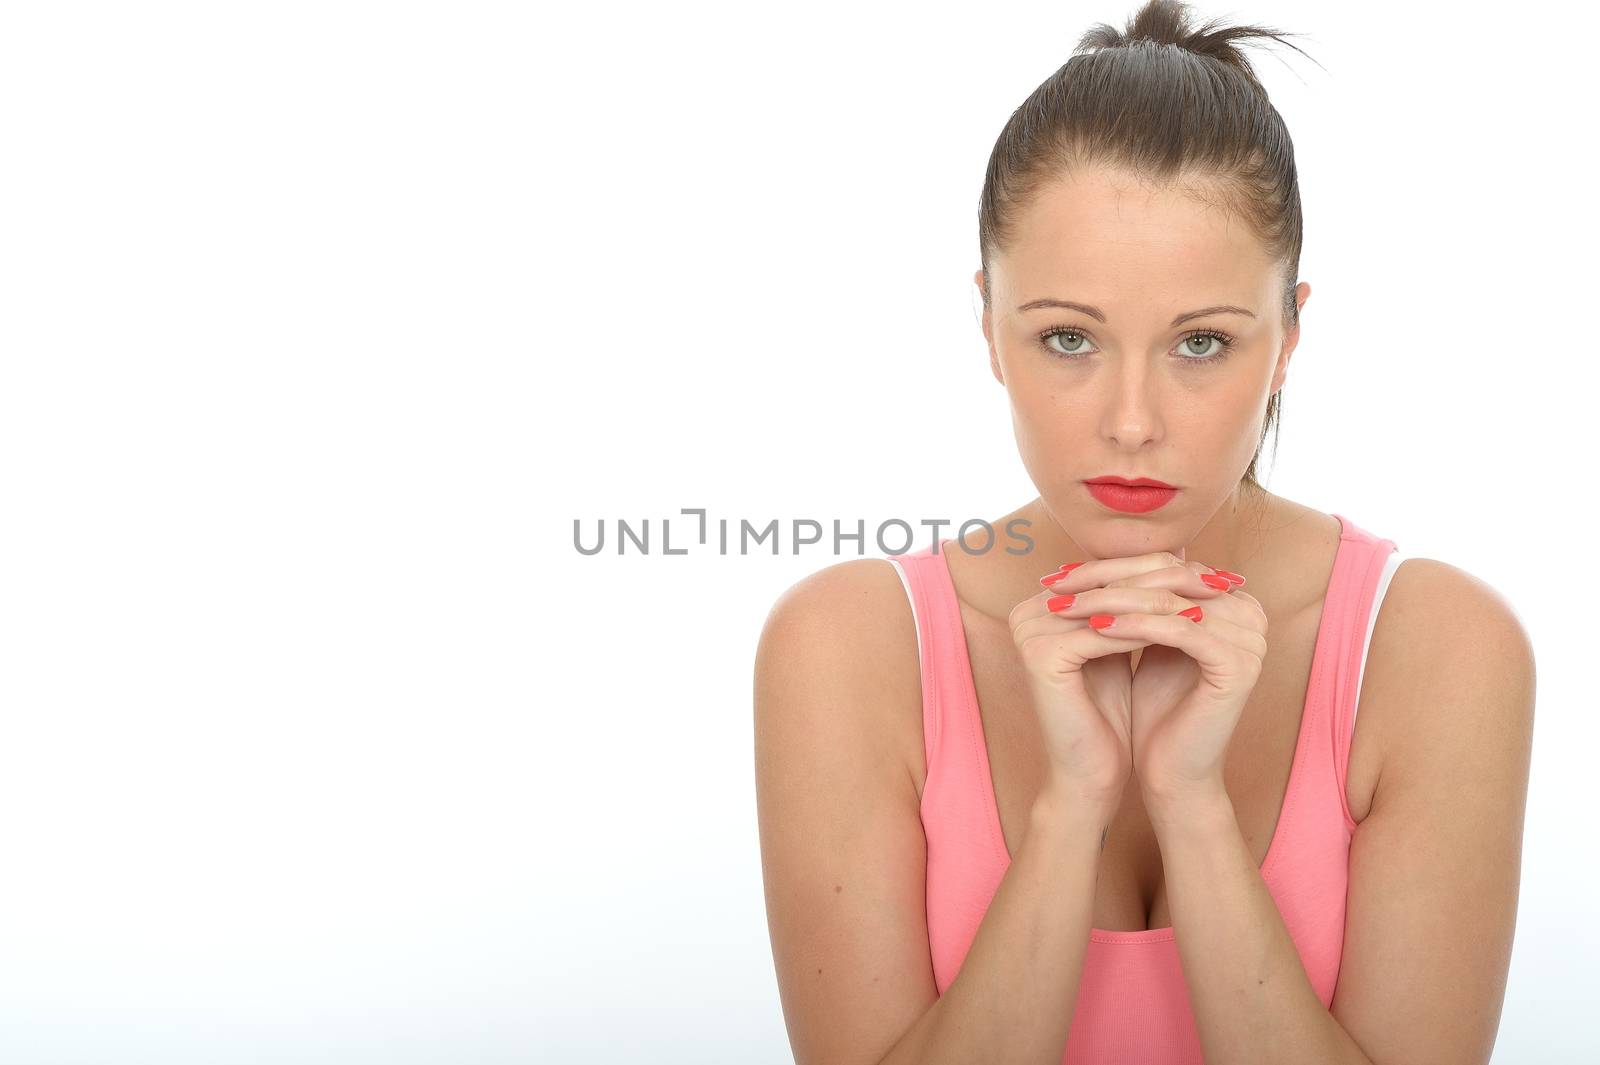 Portrait of a Sad Thoughtful Young Woman by Whiteboxmedia